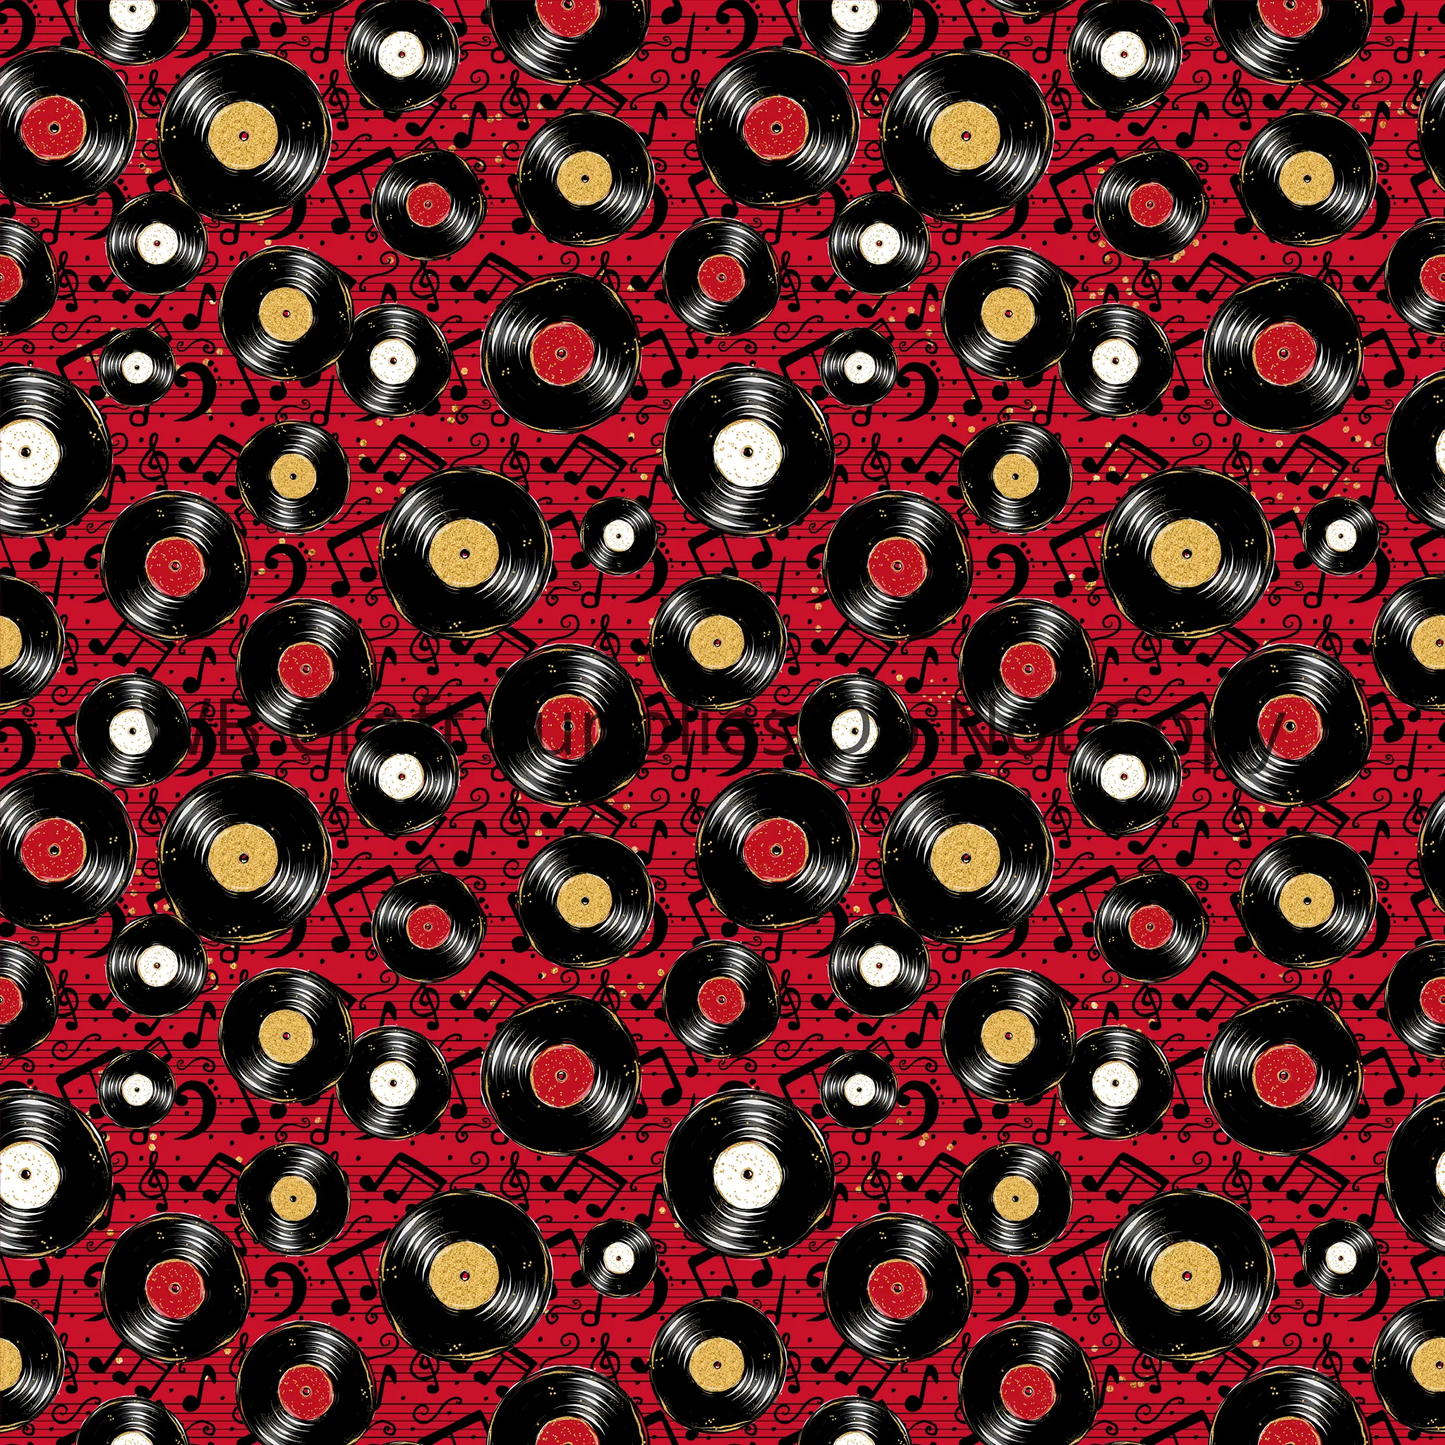 Patterned Vinyl - Records everywhere! (red)